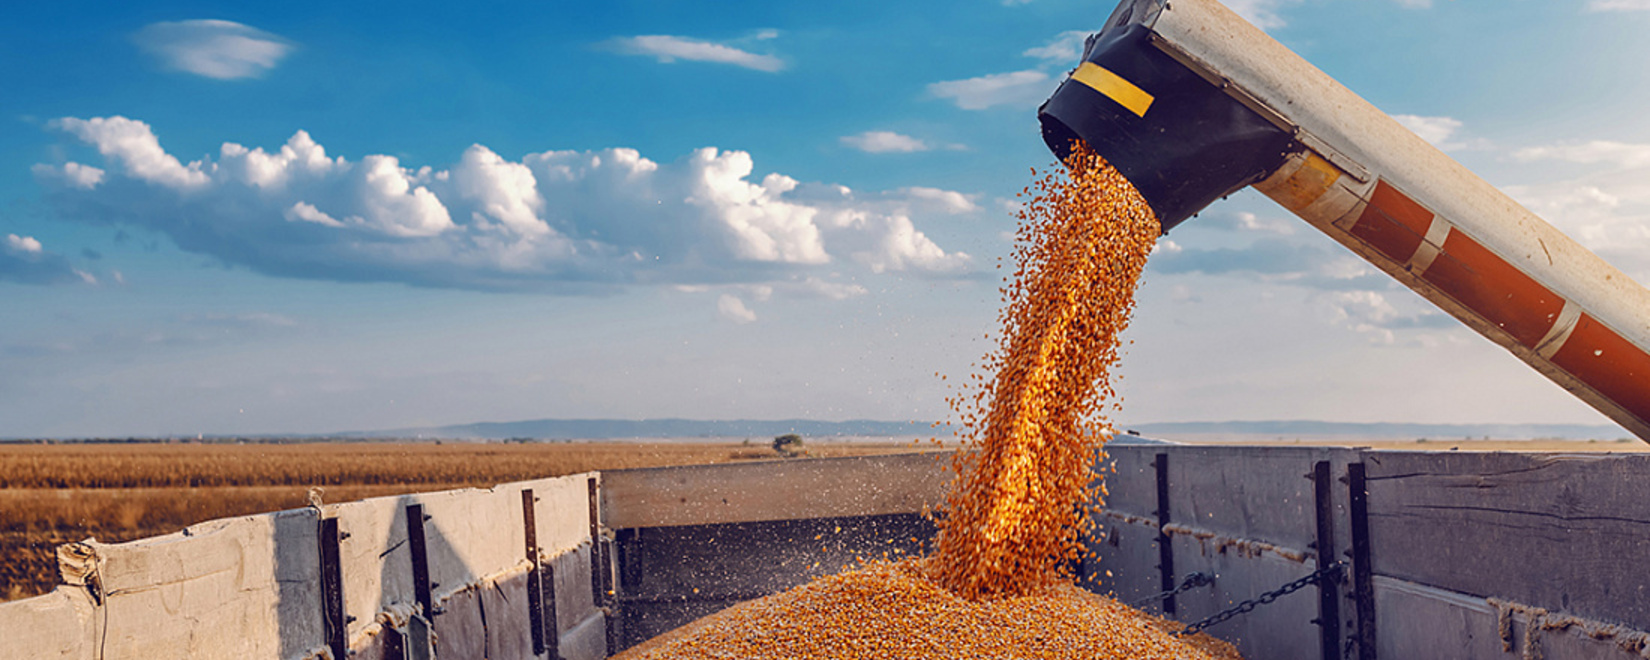 Wheat exports decreased in October. This may be due to extremely low purchase prices